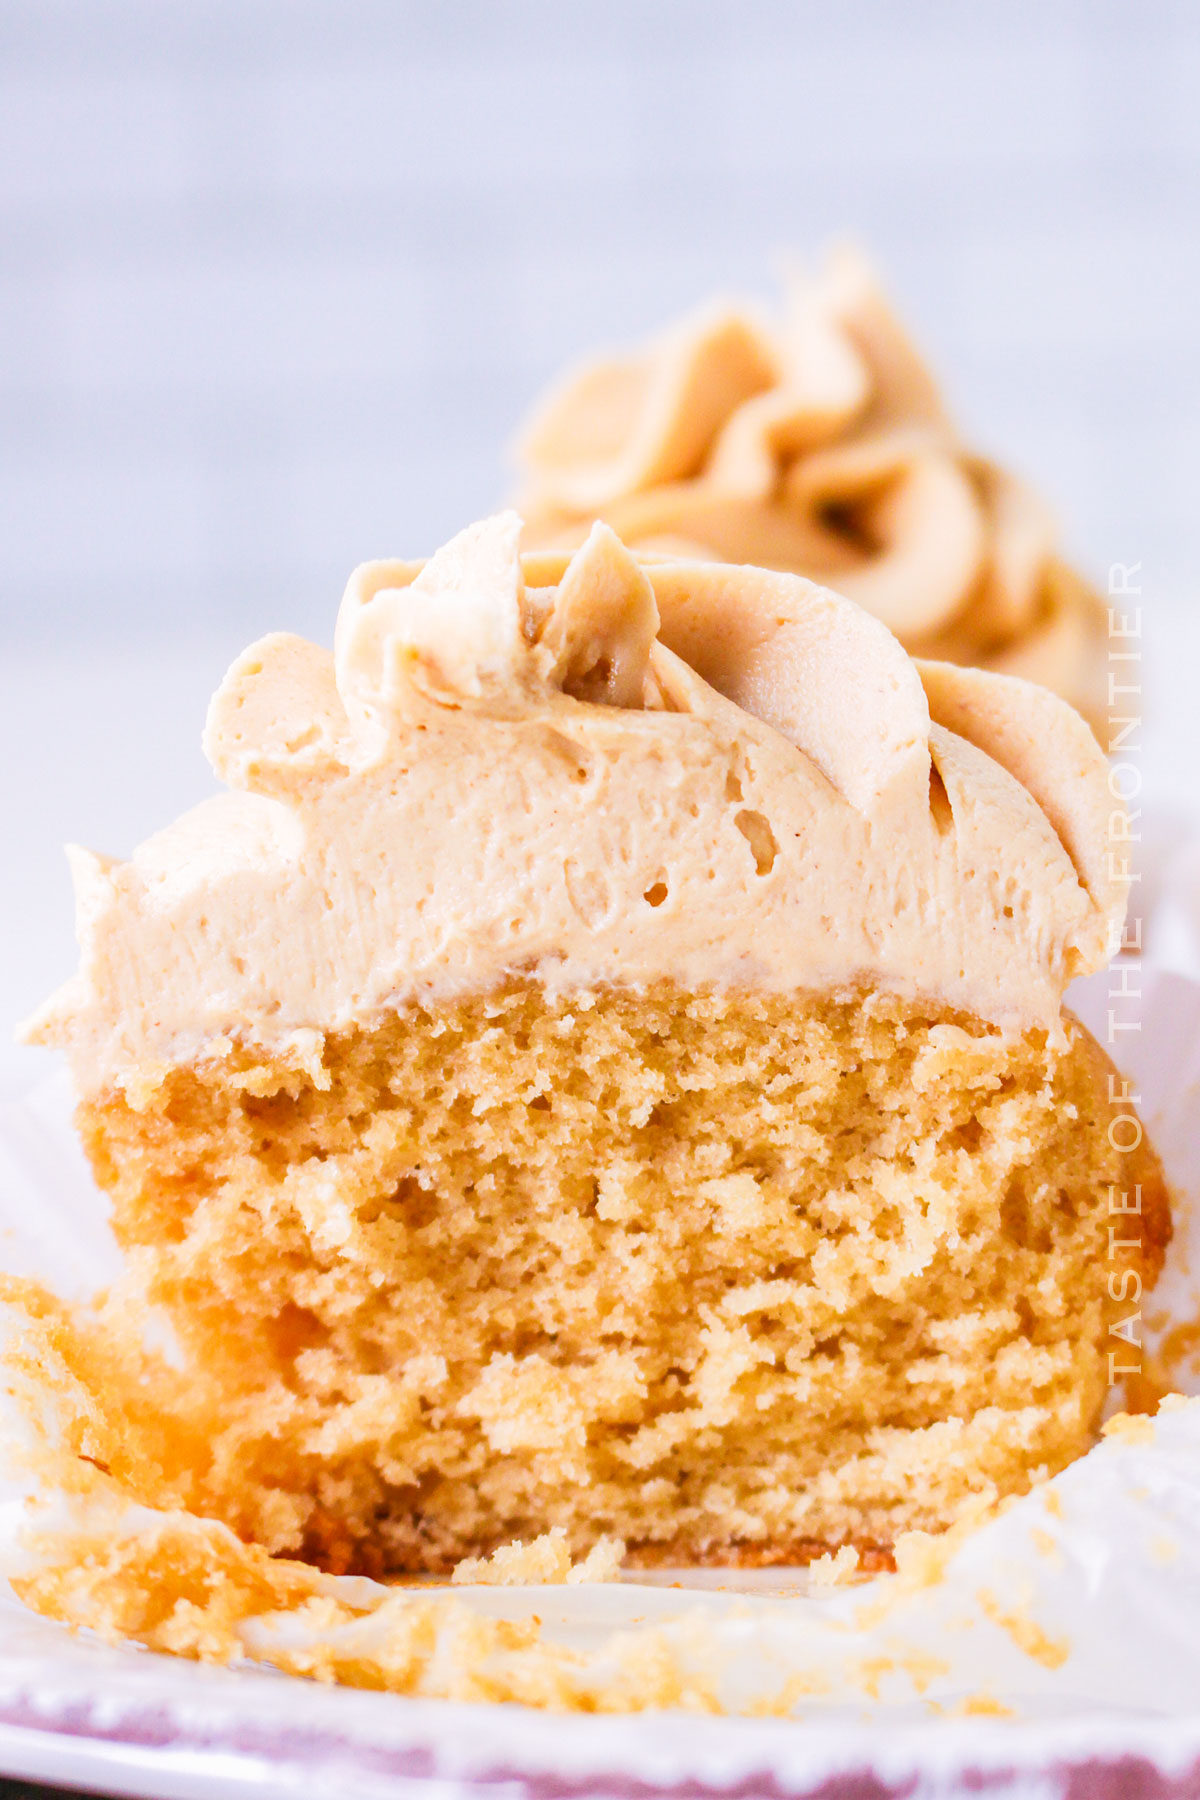 Peanut Butter Cupcakes with Peanut Butter Frosting